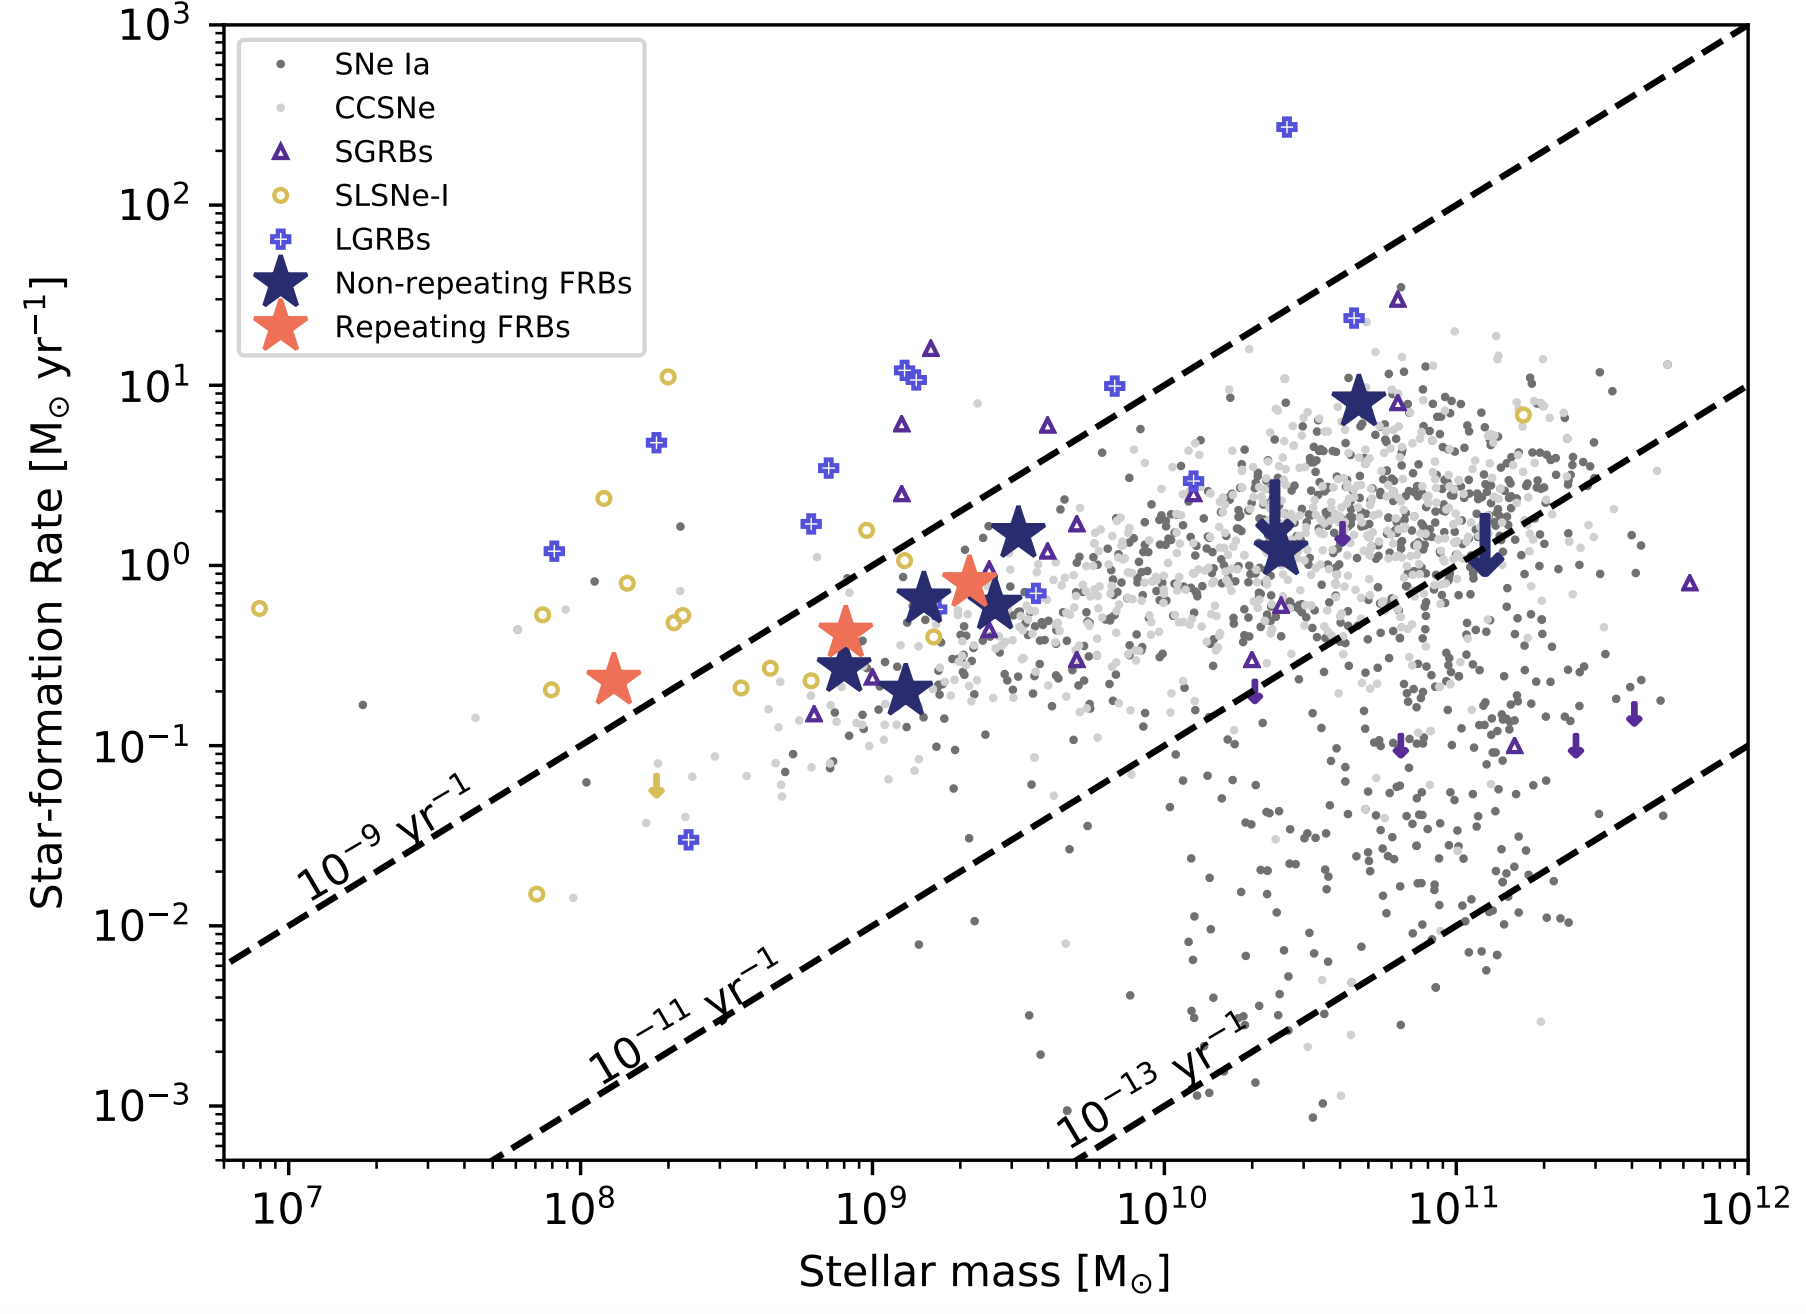 A plot comparing the stellar masses and star formation rates of FRBs, CCSNe, Type Ia SNe, LGRBs, SGRBs, and SLSNe-I.